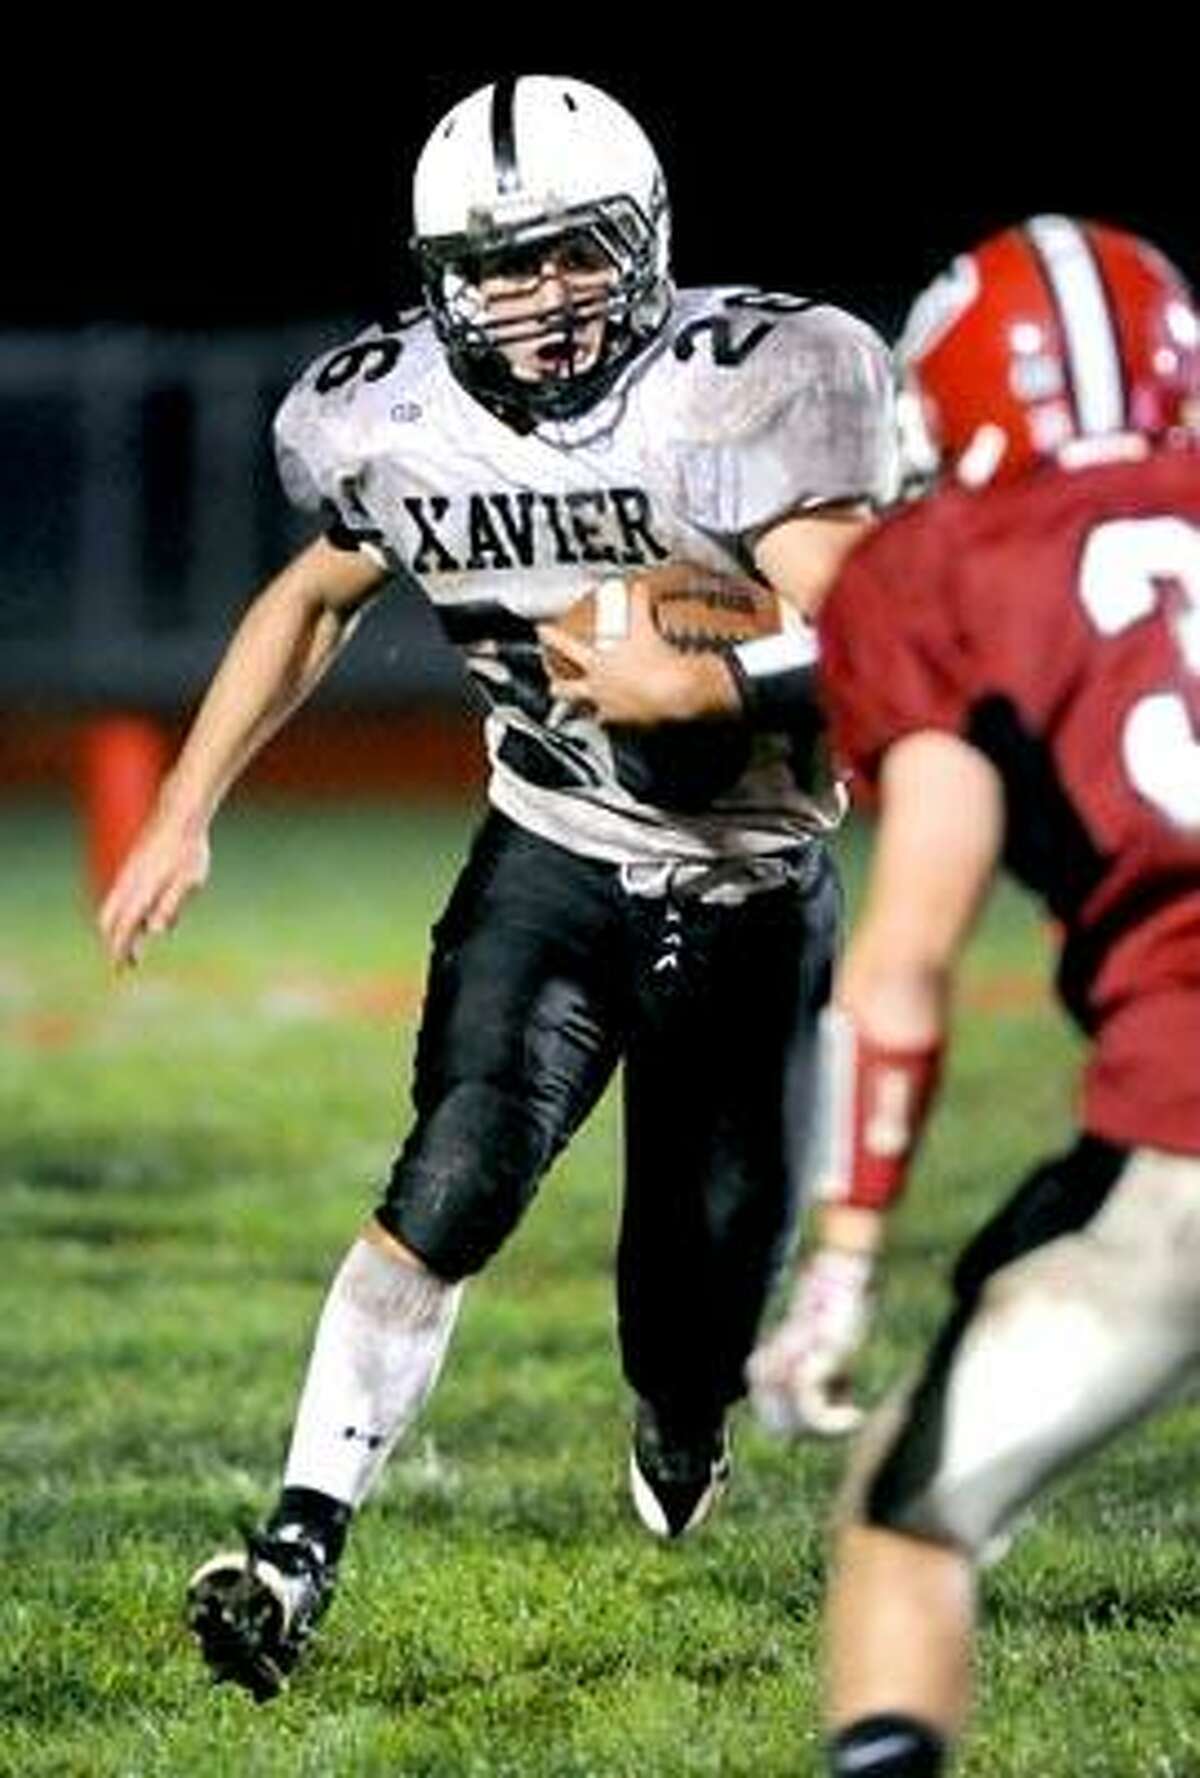 Mike Mastrioanni of Xavier runs against Cheshire in the second half at Cheshire on 10/1/2010.Photo by Arnold Gold AG0386D